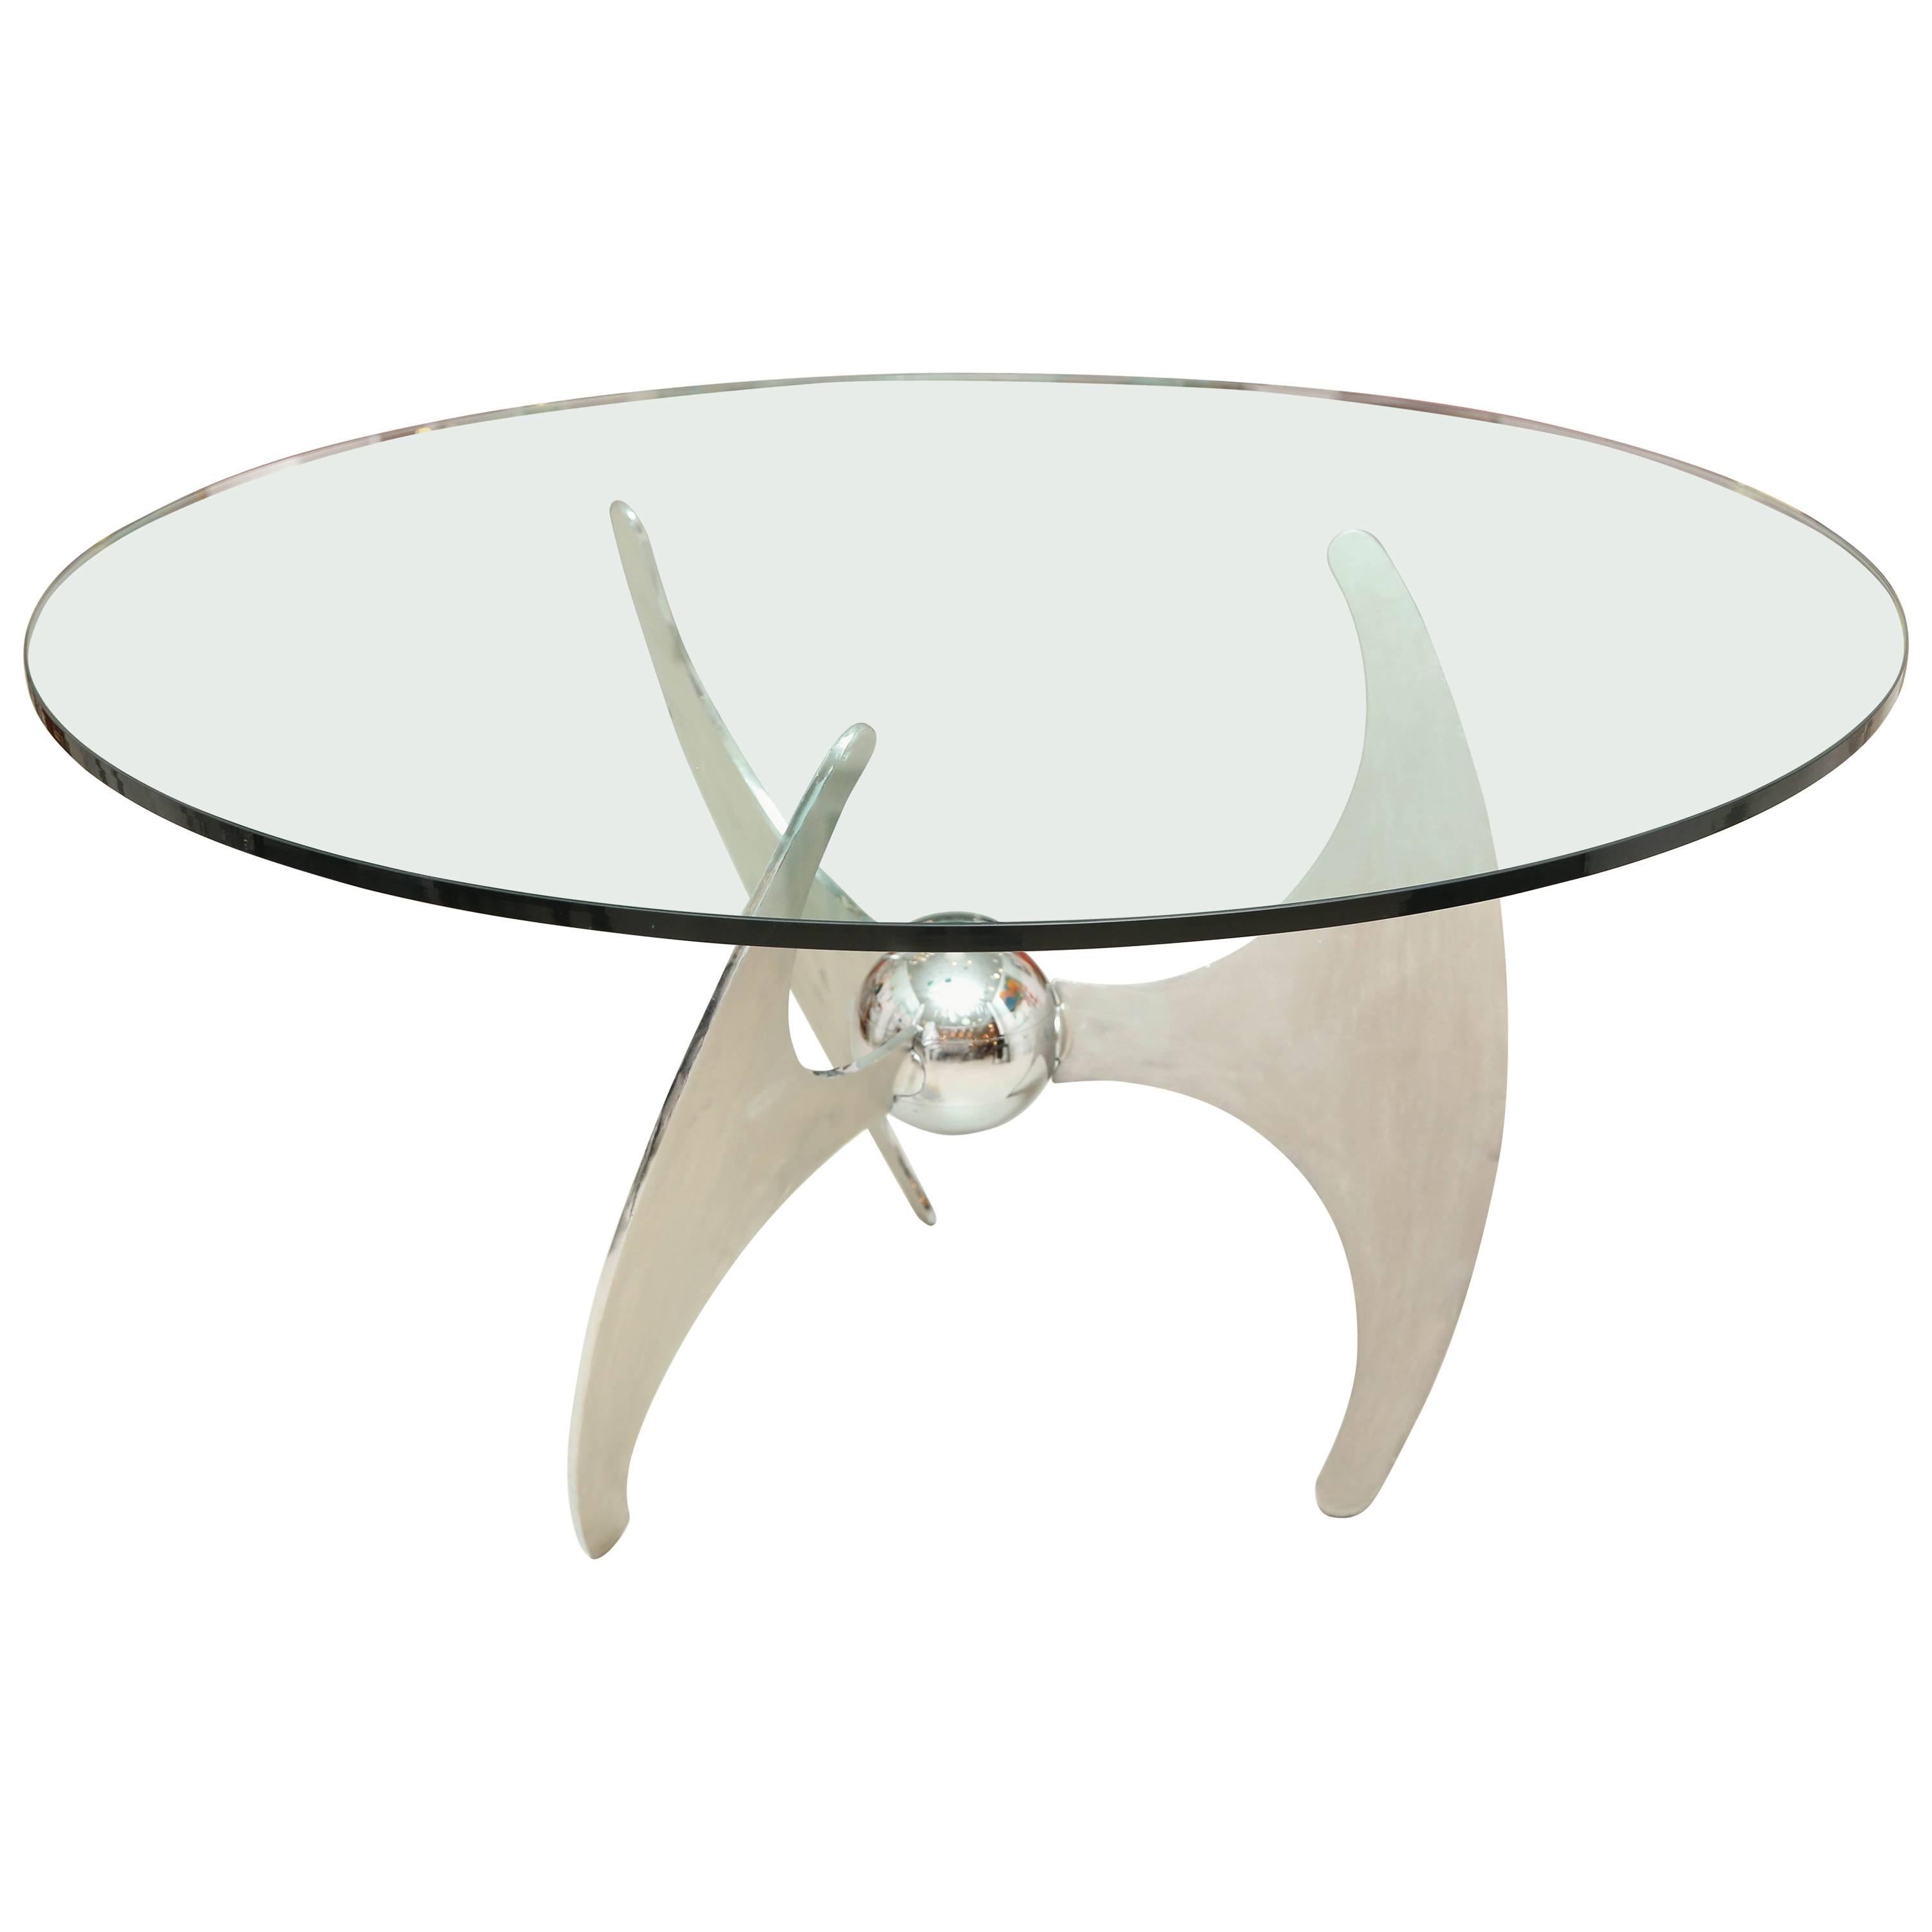 Vintage Mid-Century Atomic "Propeller" Convertible Table For Sale